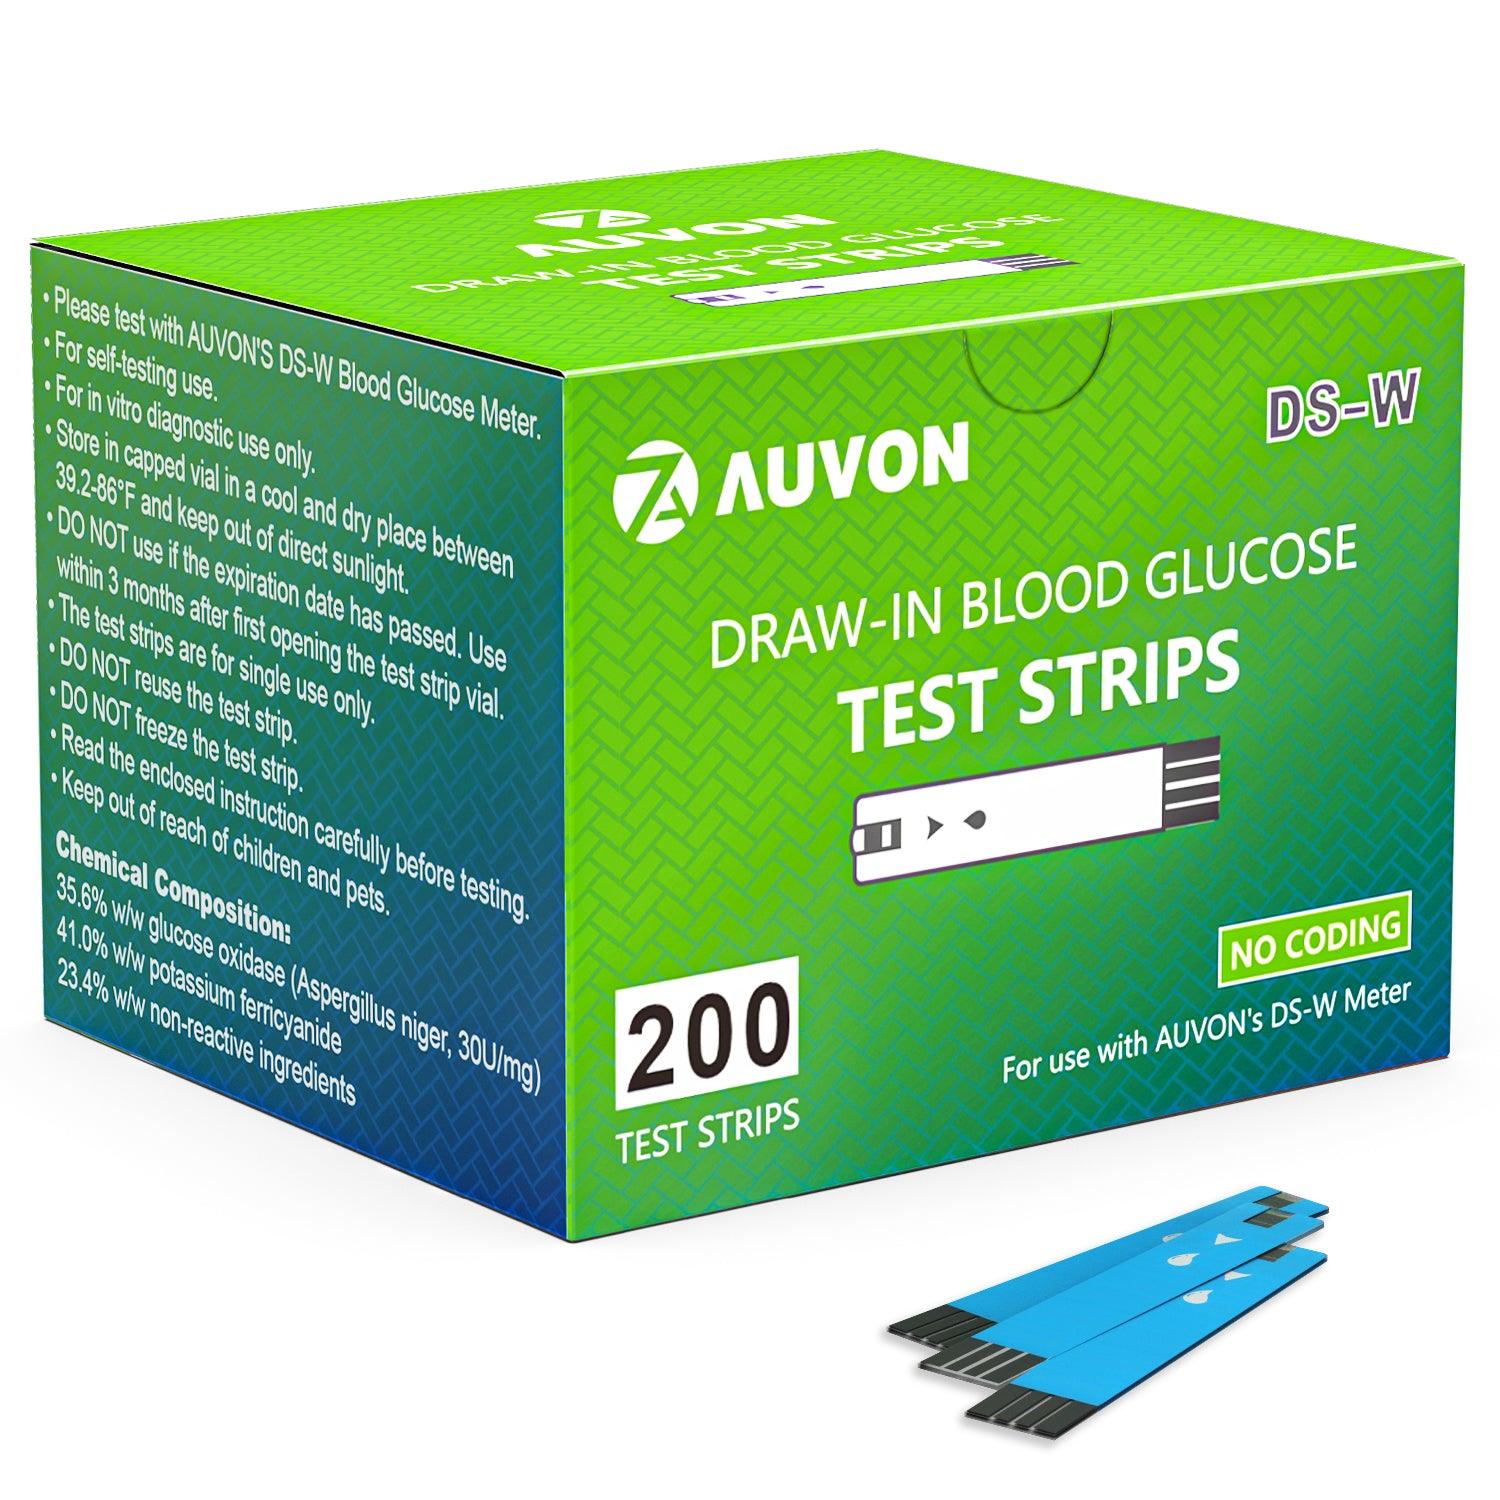 AUVON I-QARE DS-W Draw-in Blood Glucose Test Strips (200 Count) for use with AUVON DS-W Diabetes Sugar Testing Meter (No Coding Required, 4 Box of 50 Each) - AUVON